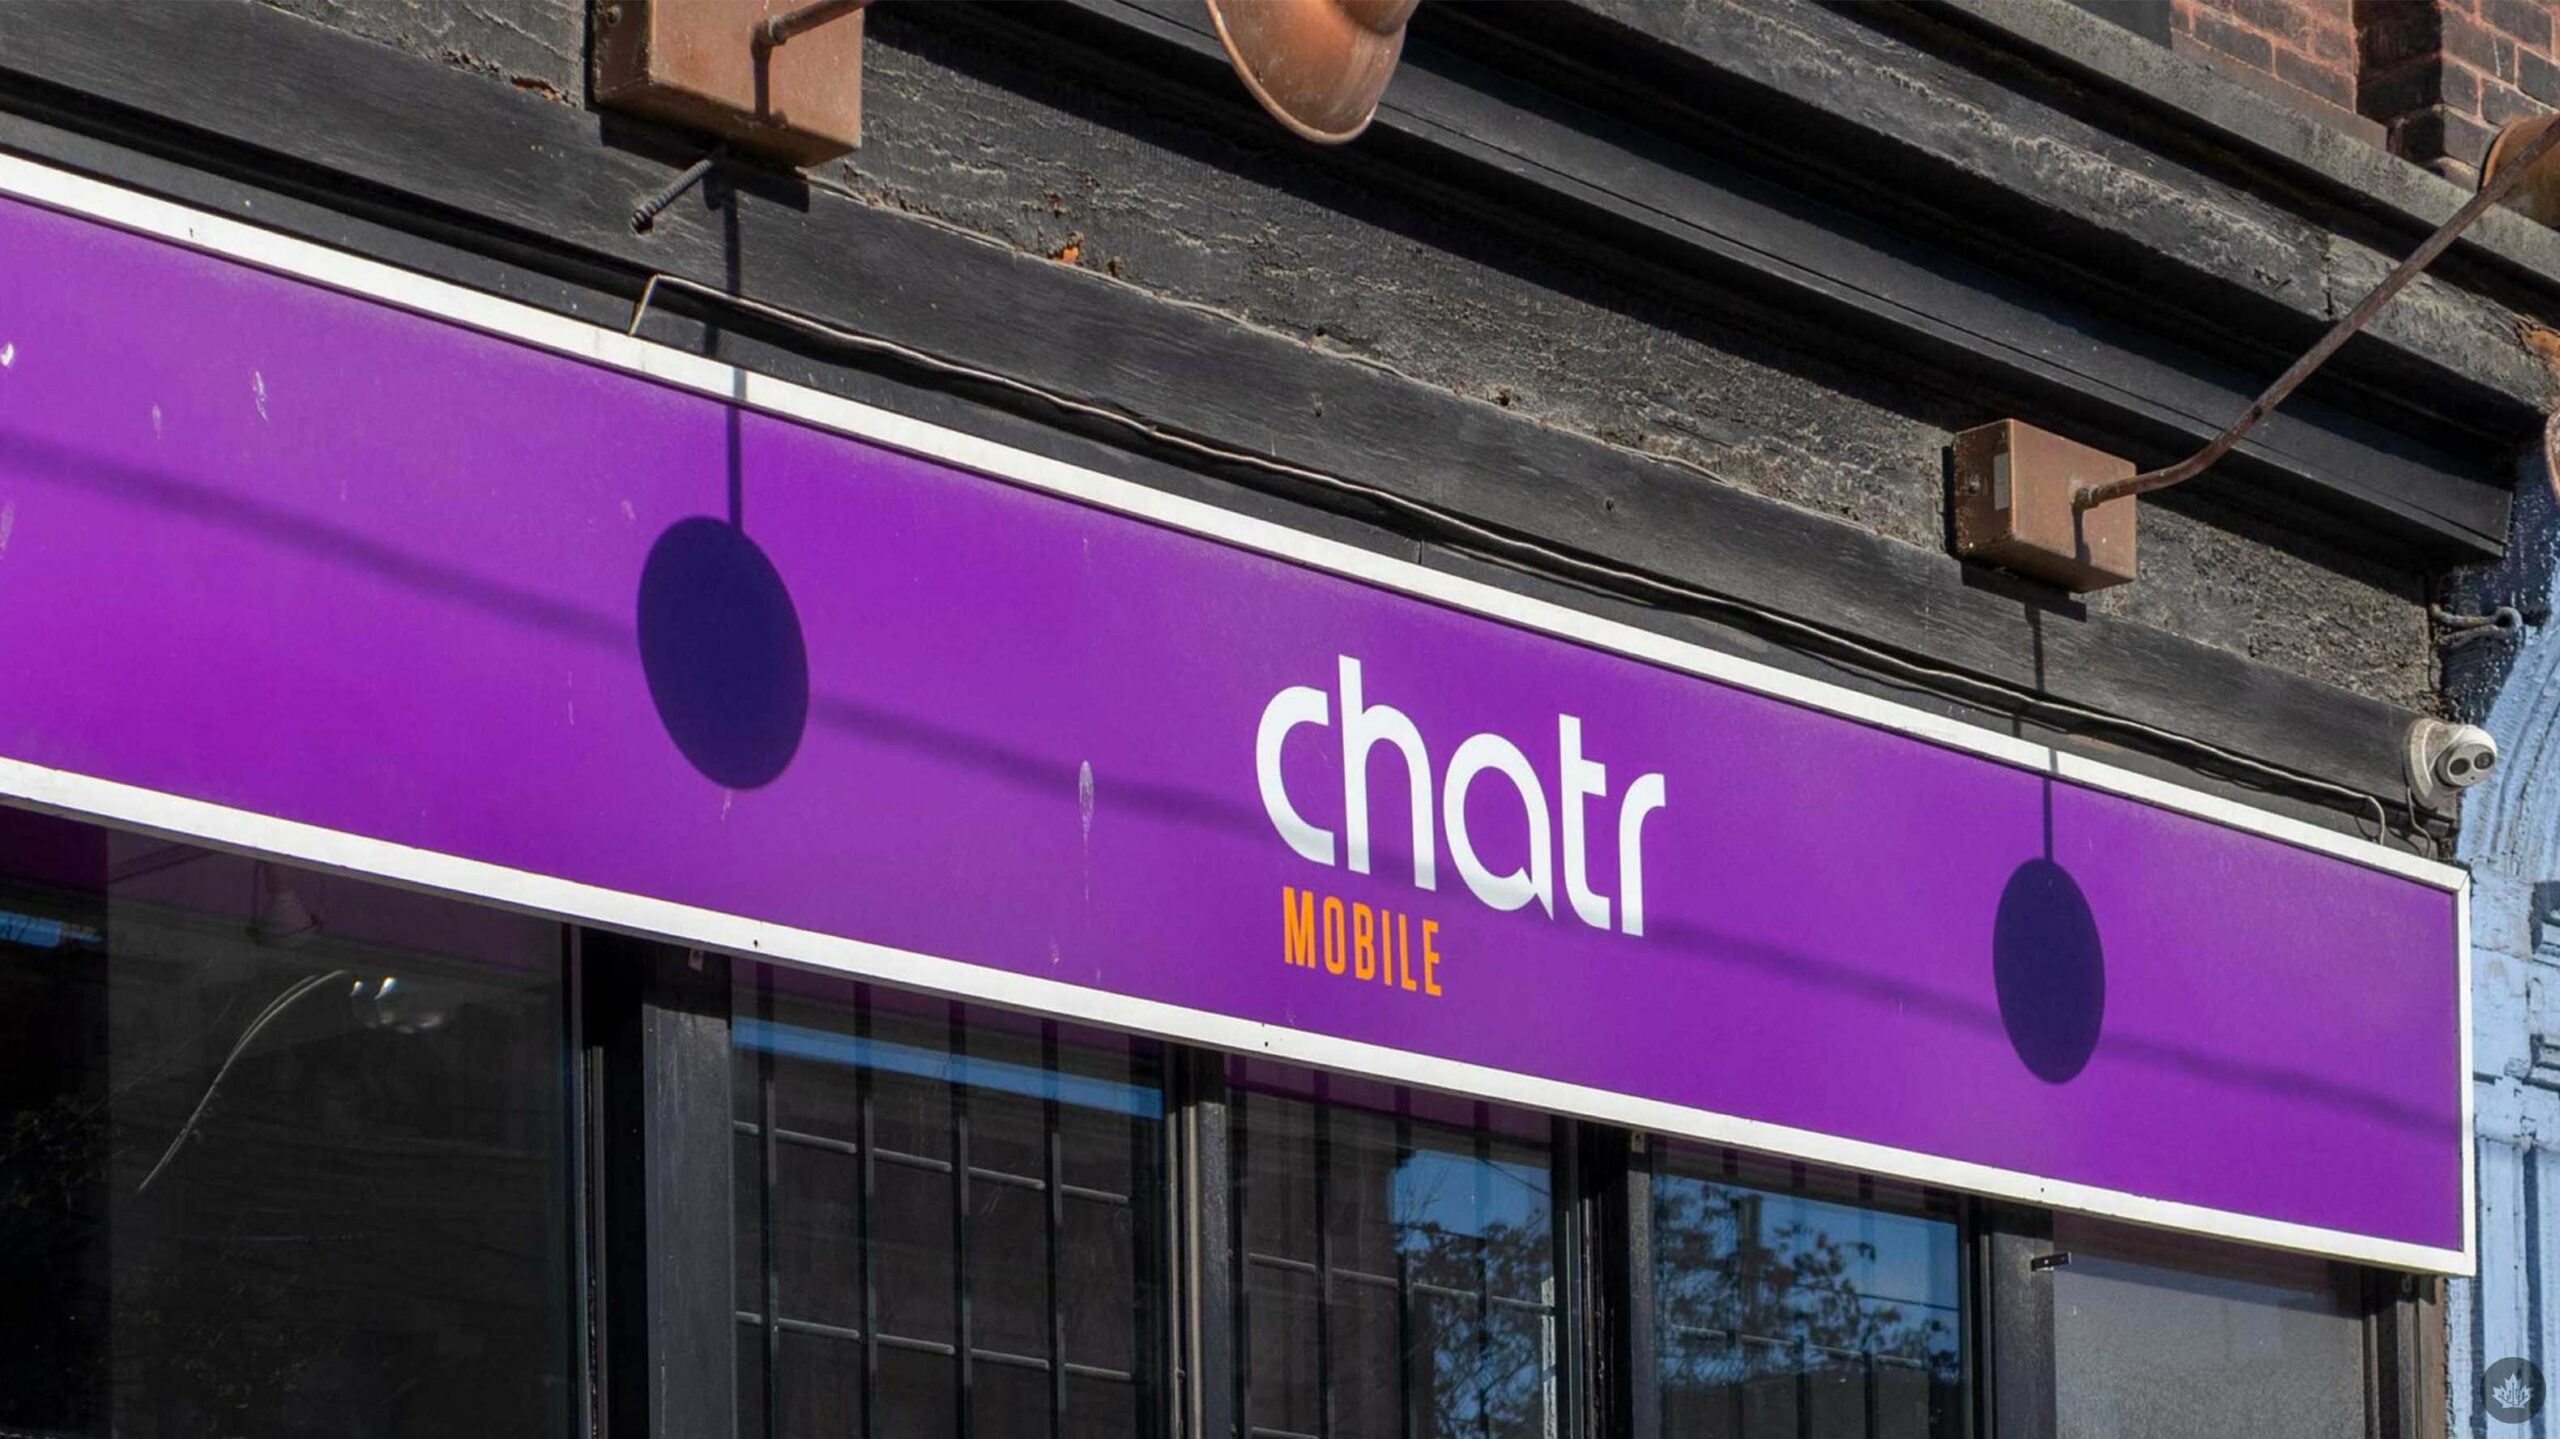 Chatr Mobile offering 8GB of monthly bonus data for eight months thumbnail